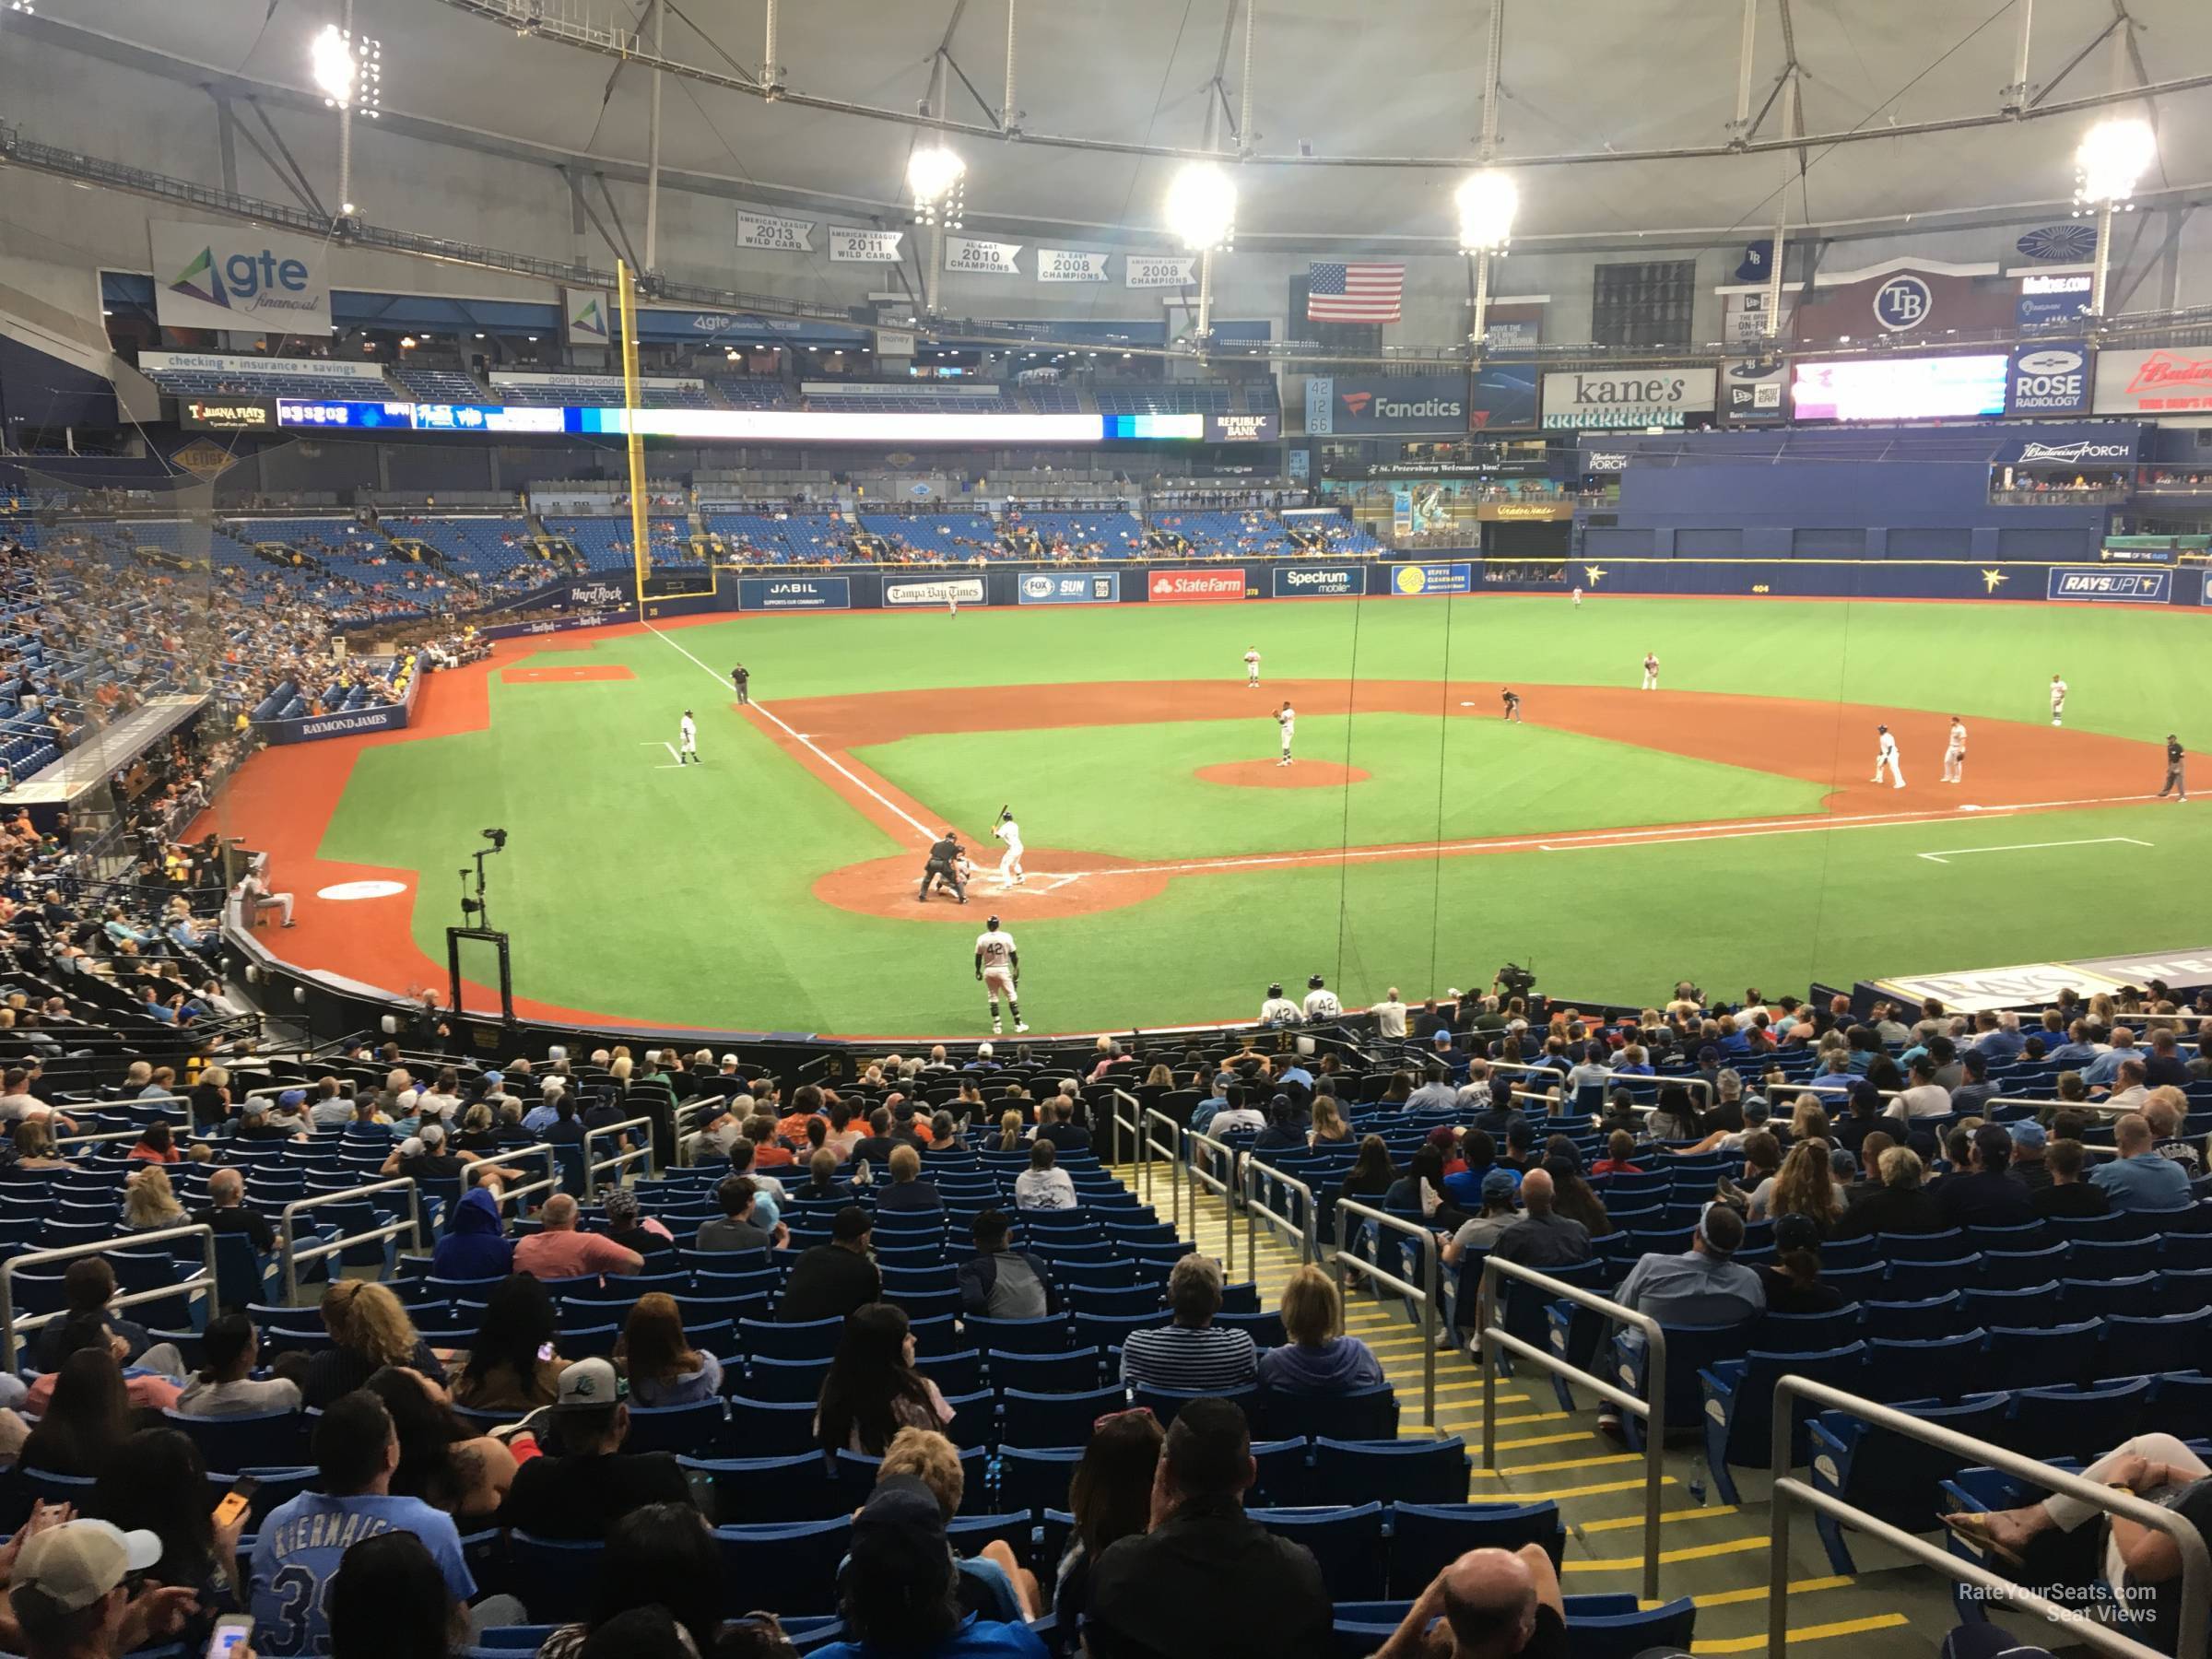 section 106, row jj seat view  for baseball - tropicana field